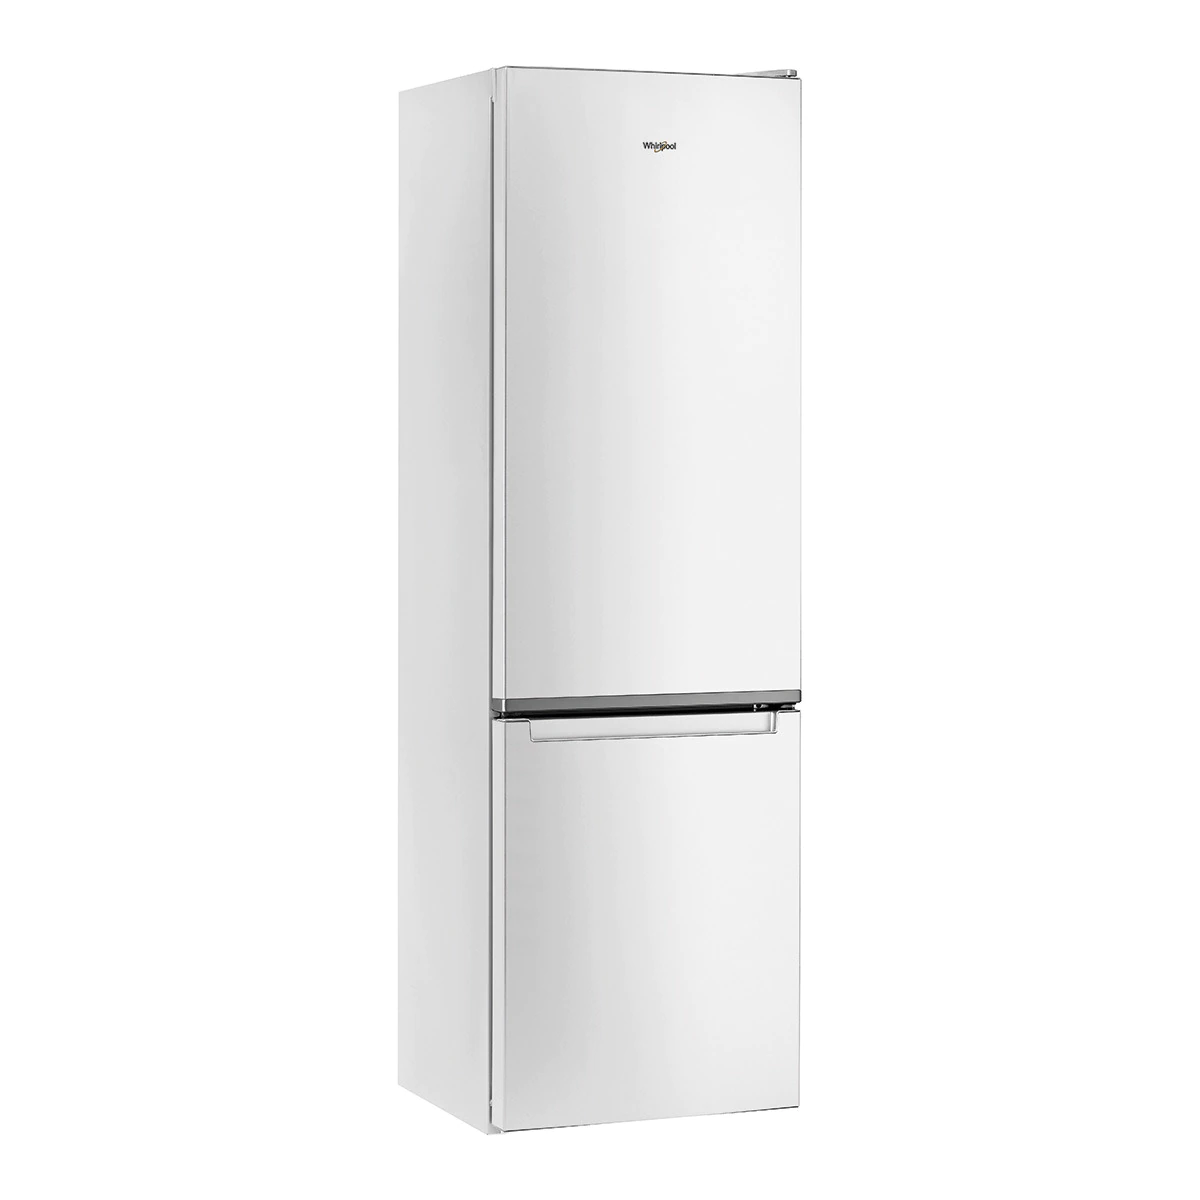 Frigorífico combi Whirlpool W7 931 A W Total No Frost